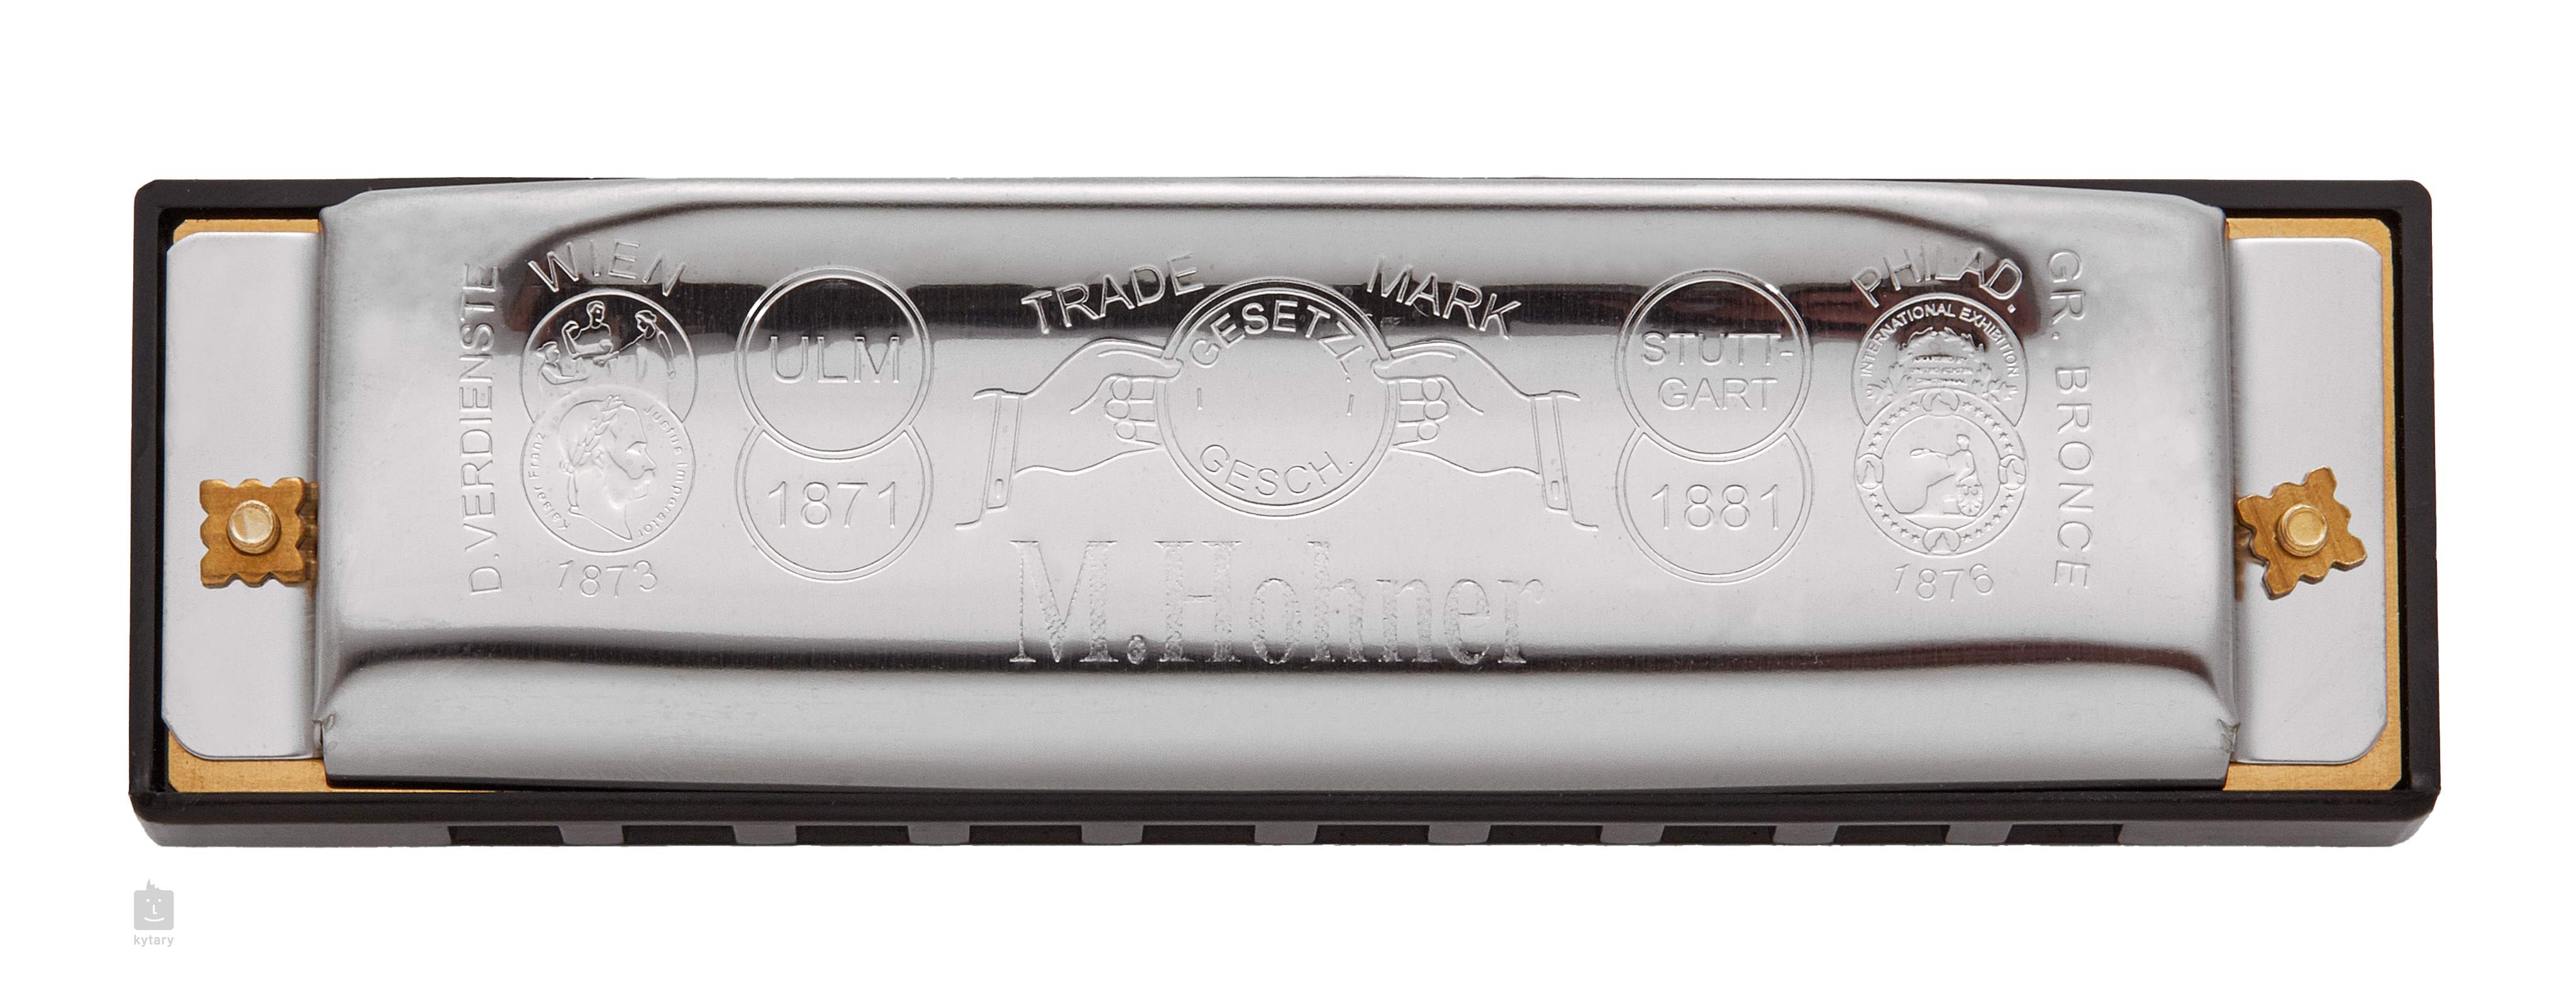 Hohner Special 20 in B 560 20 B, Harmonica